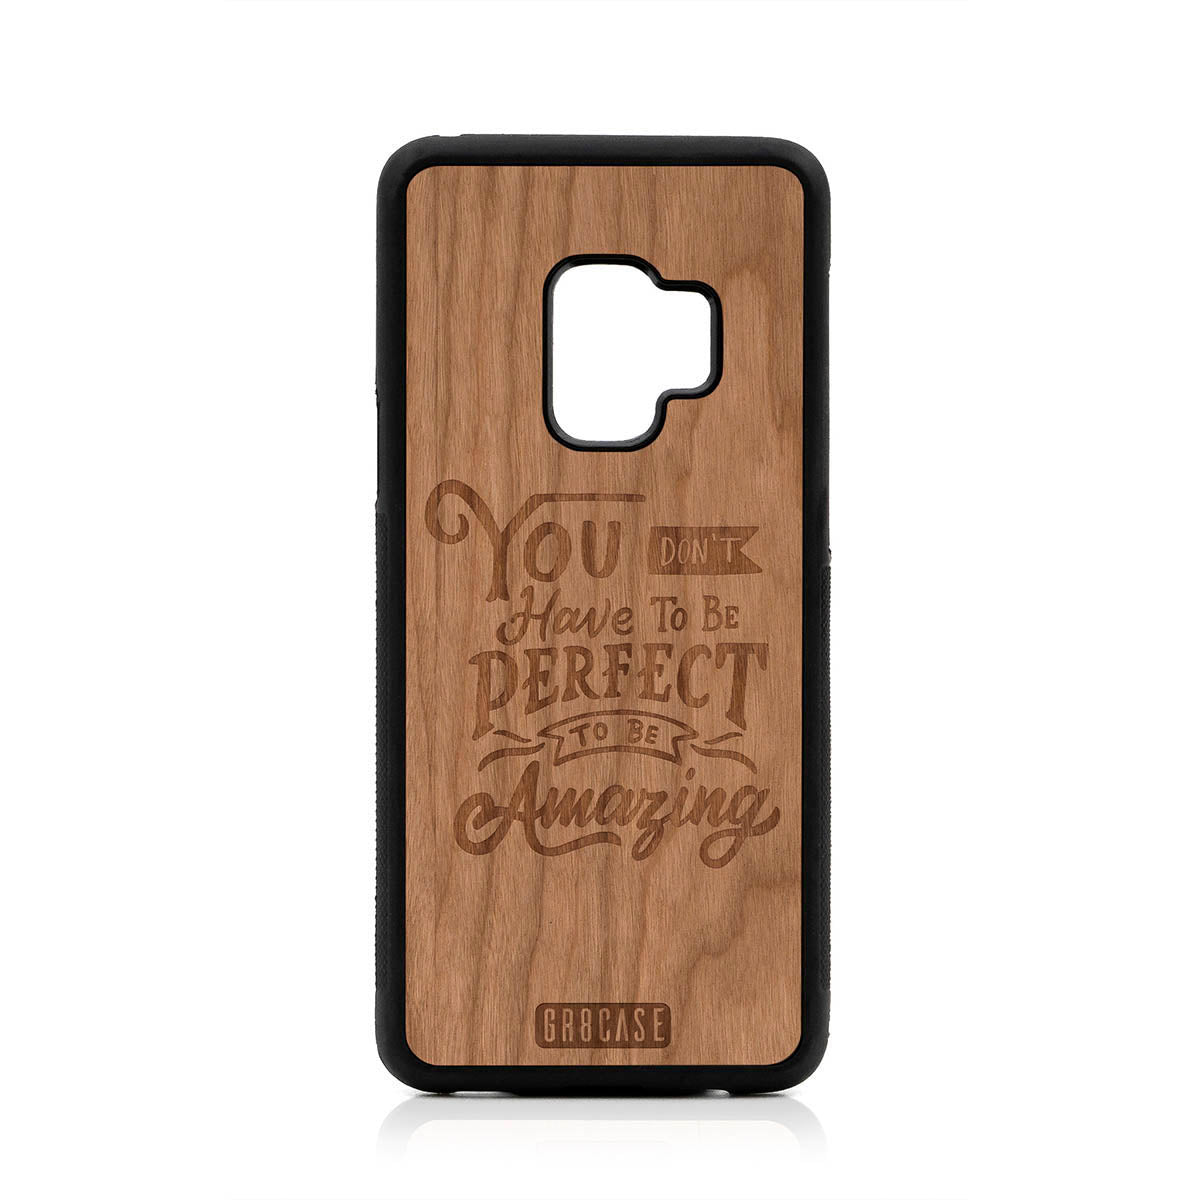 You Don't Have To Be Perfect To Be Amazing Design Wood Case For Samsung Galaxy S9